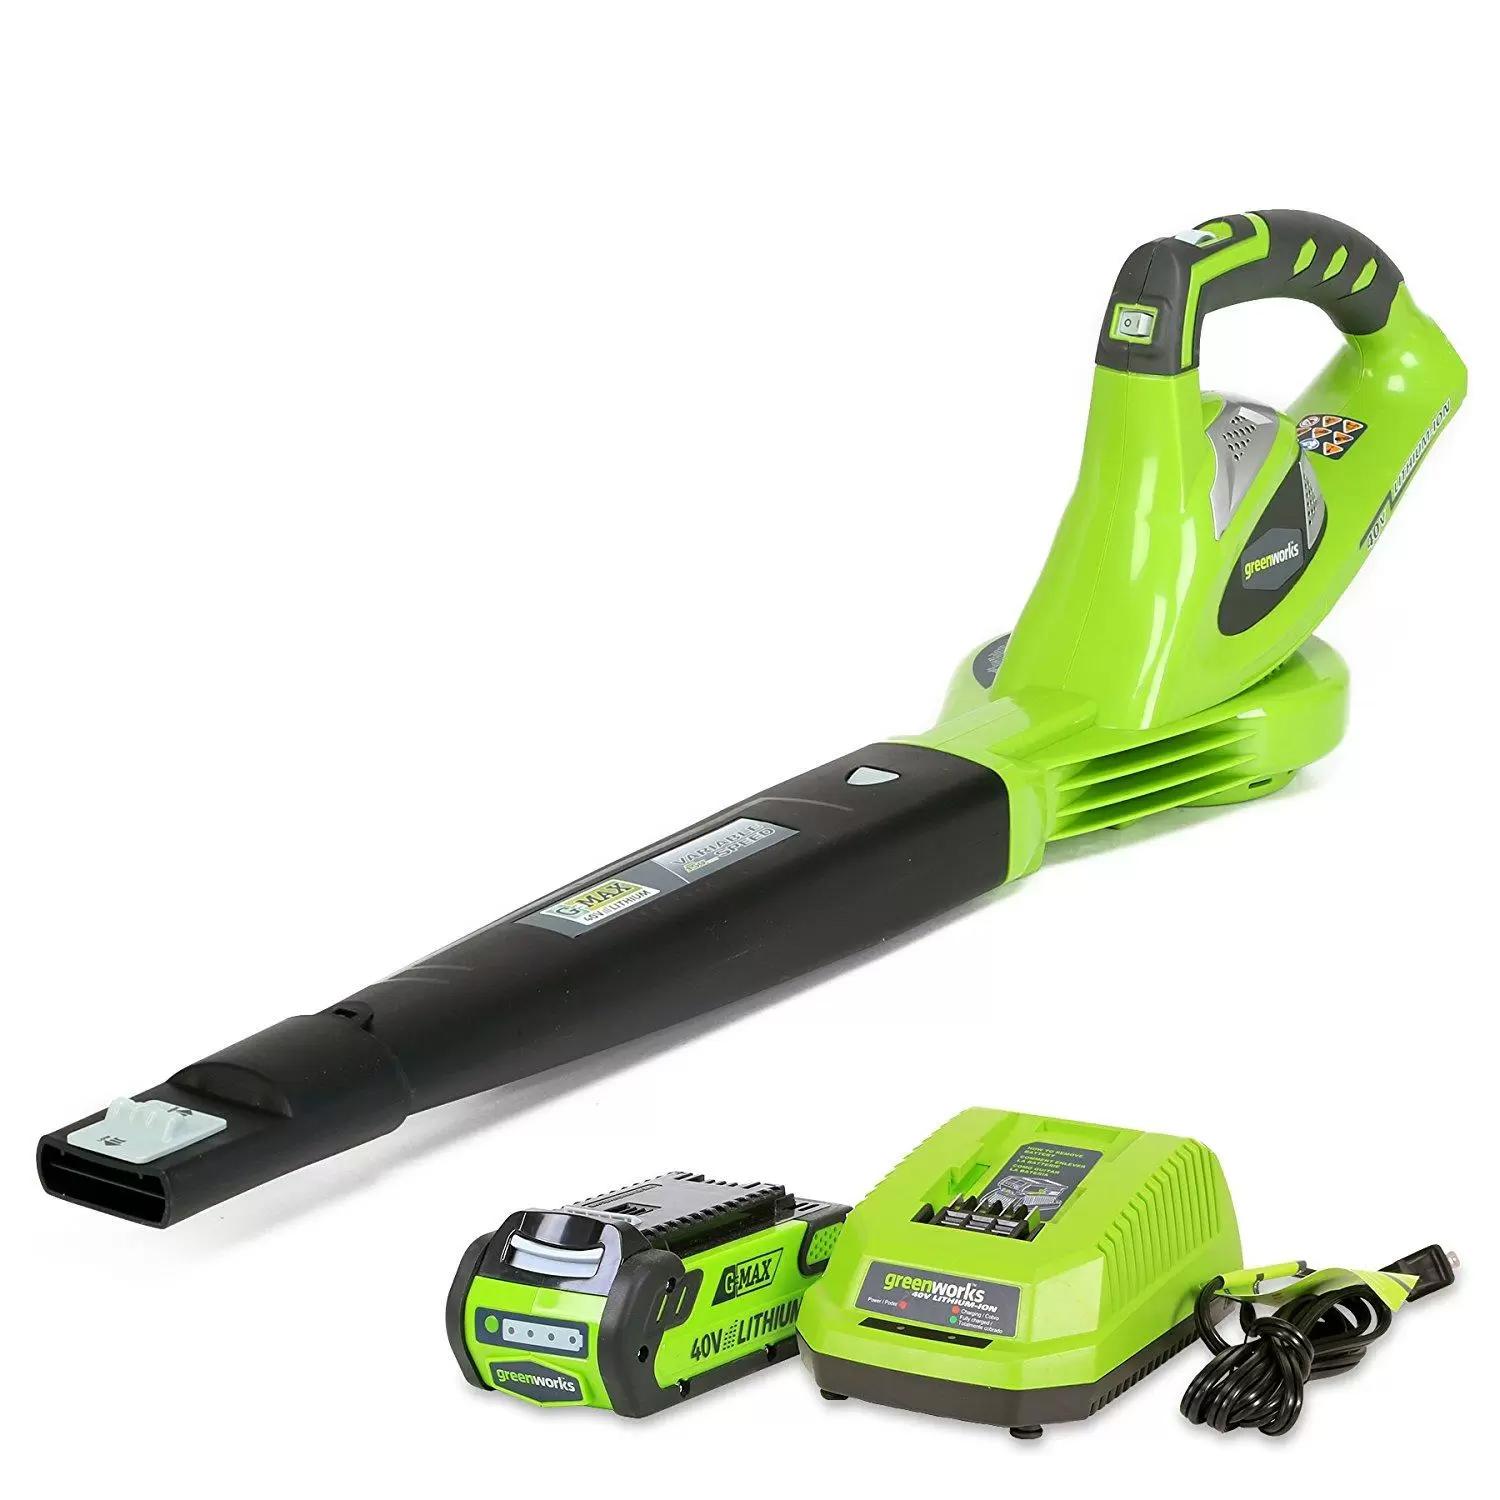 Greenworks 40V Variable Speed Cordless Blower for $90.30 Shipped